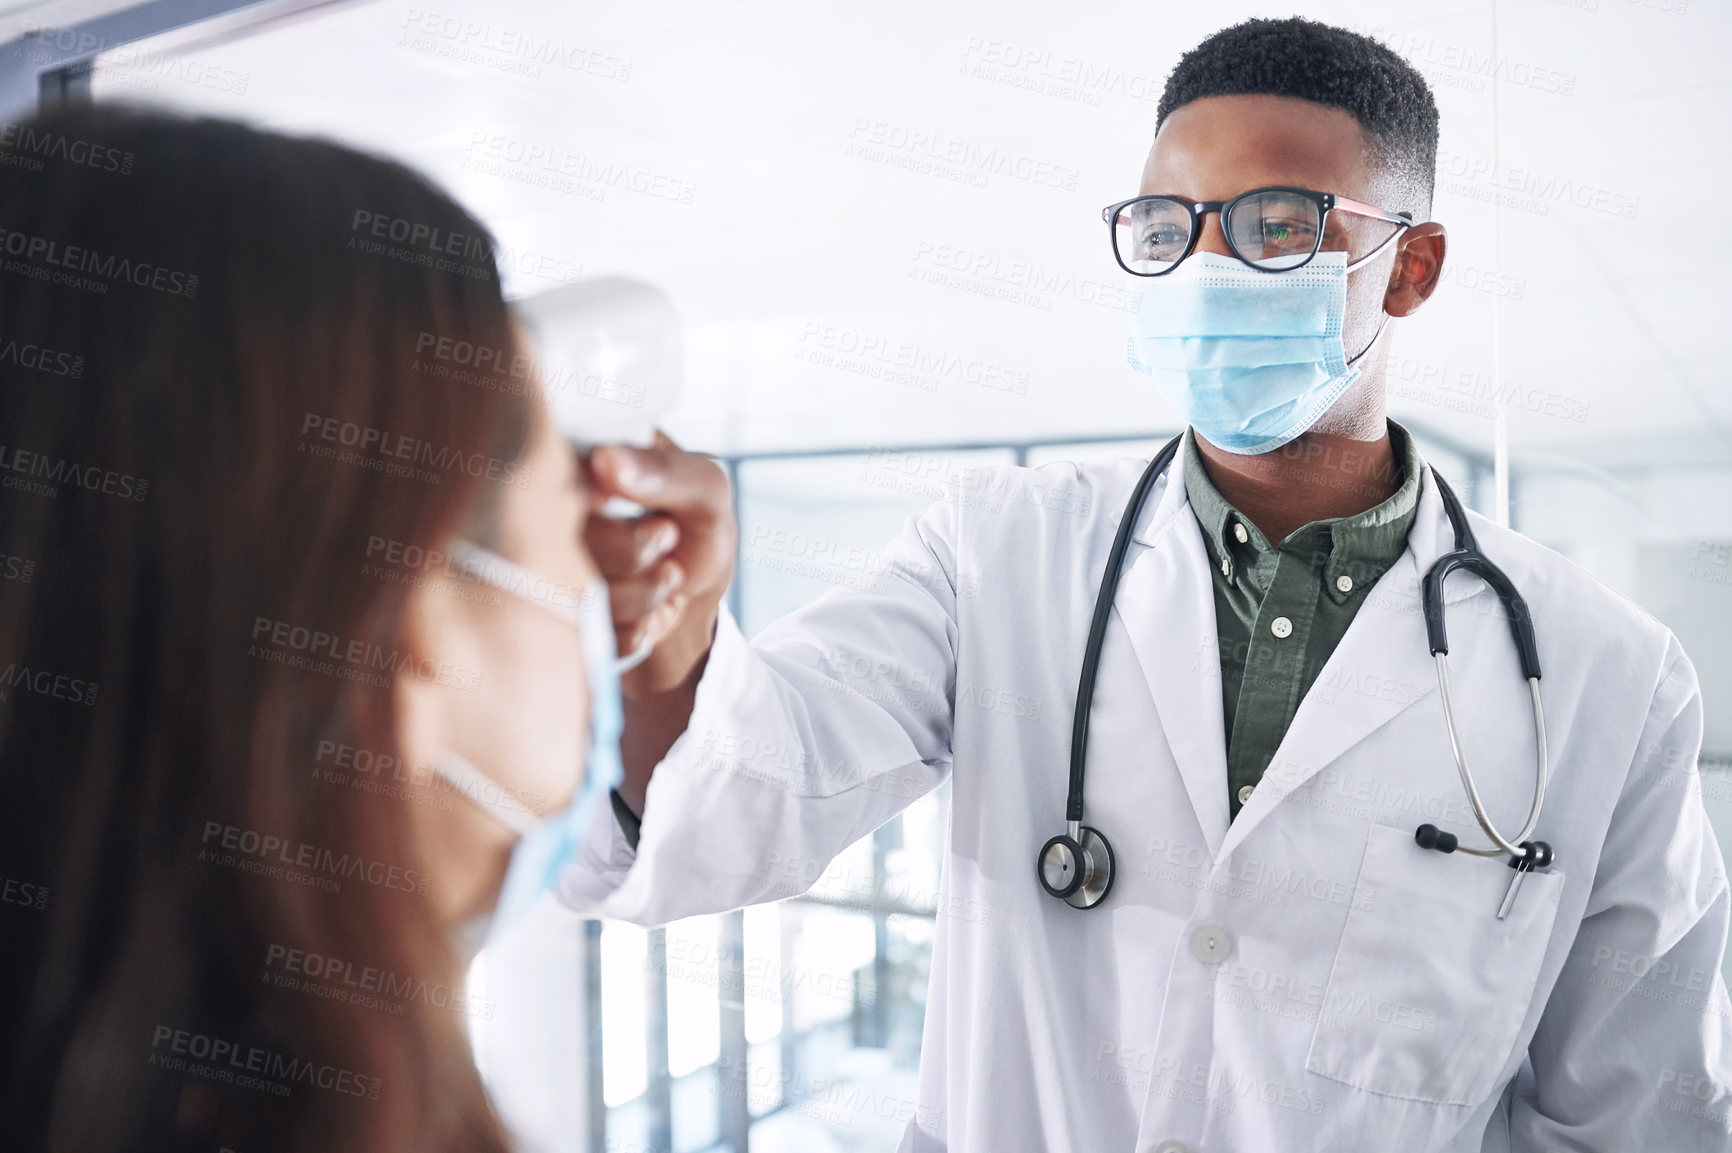 Buy stock photo Shot of a young doctor wearing a mask and standing with a patient in the clinic while taking her temperature